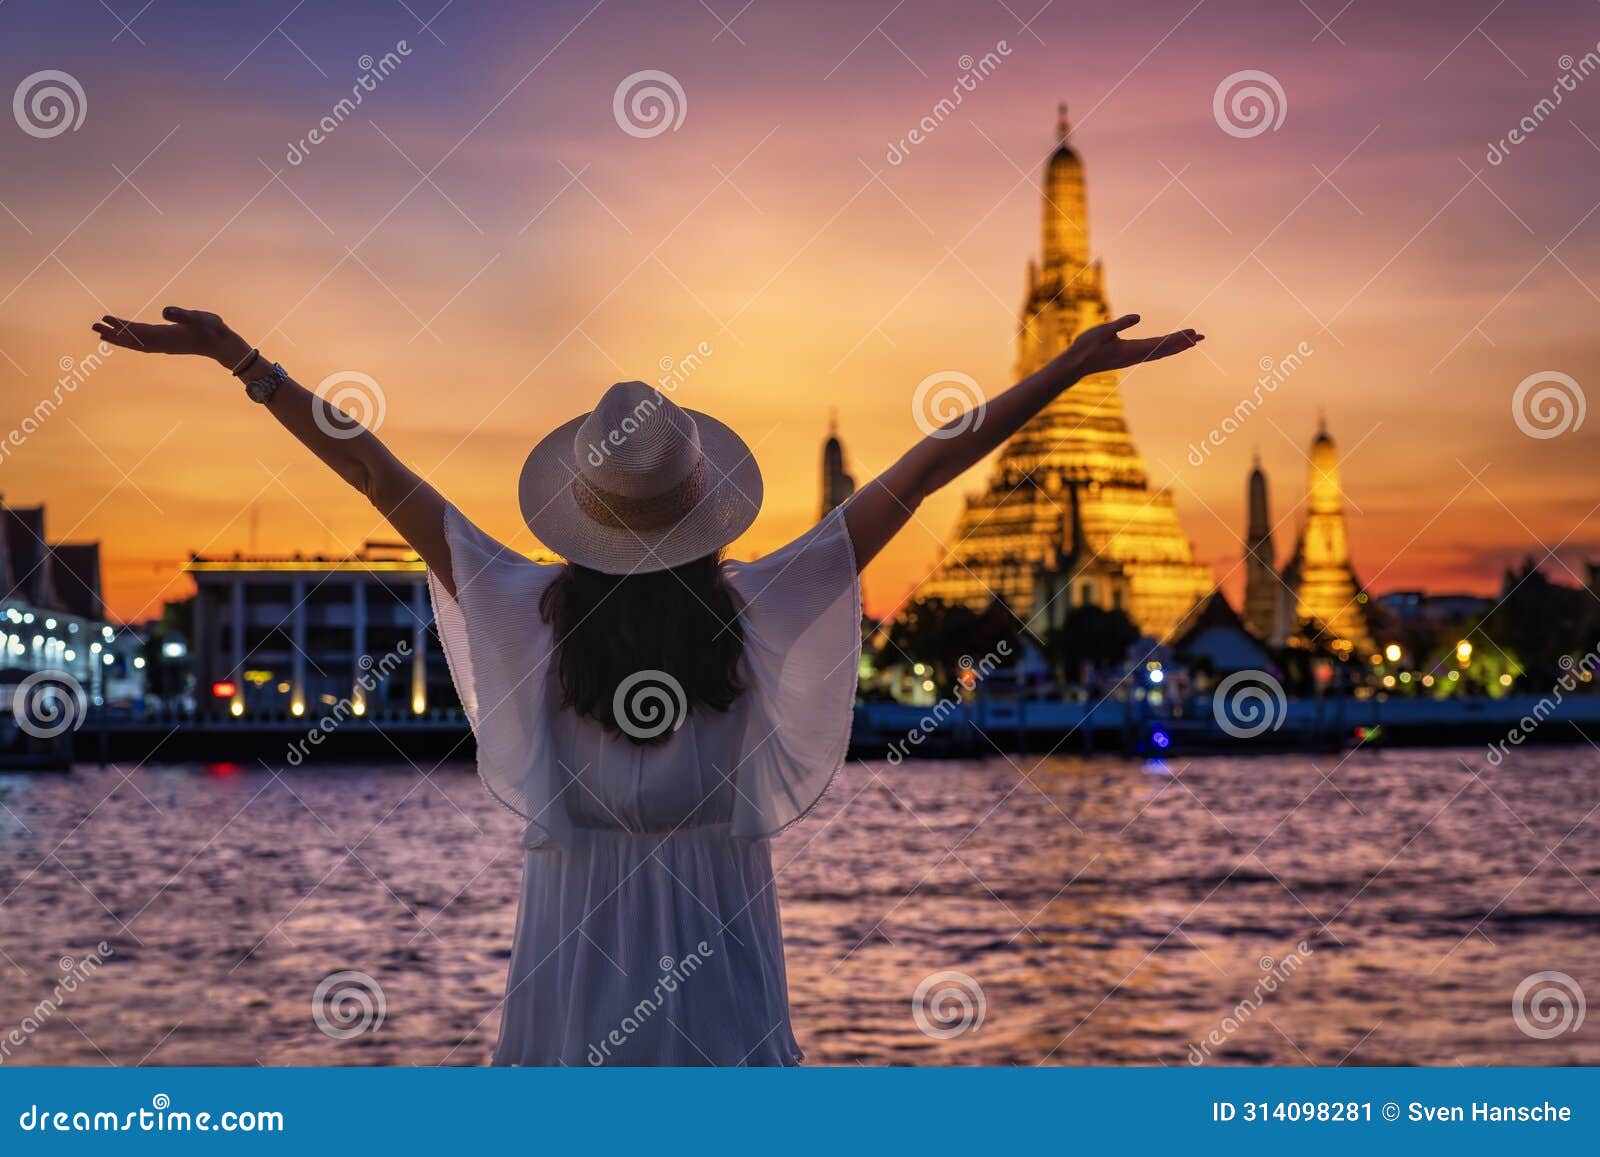 a happy tourist woman enjoys the view of the illuminated wat arun temple in bangkok